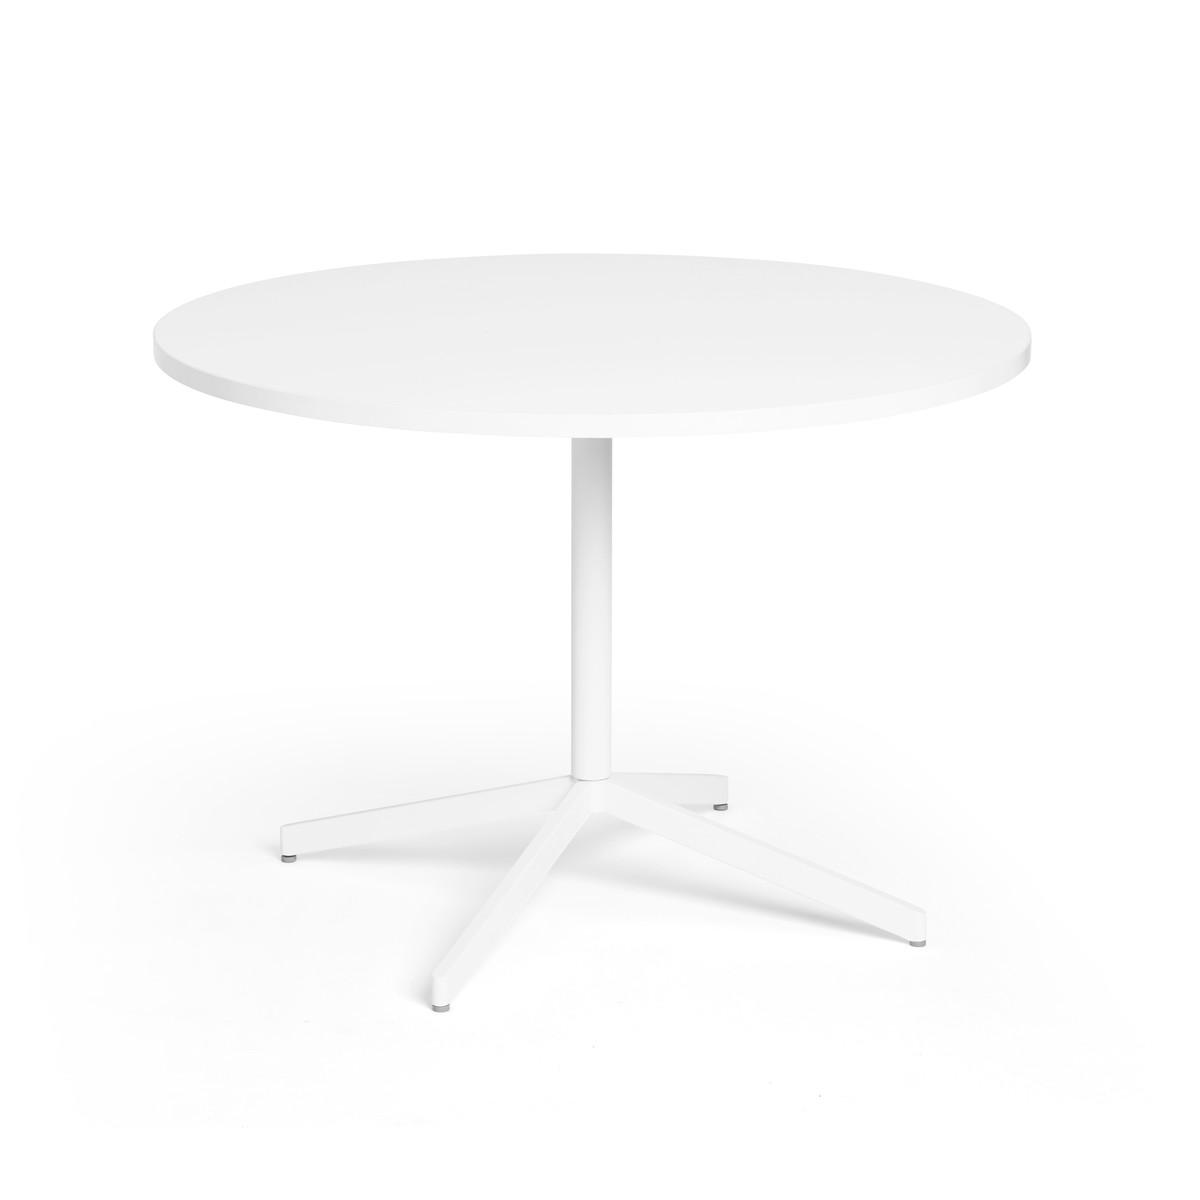 Touchpoint Meeting Table, White Legs